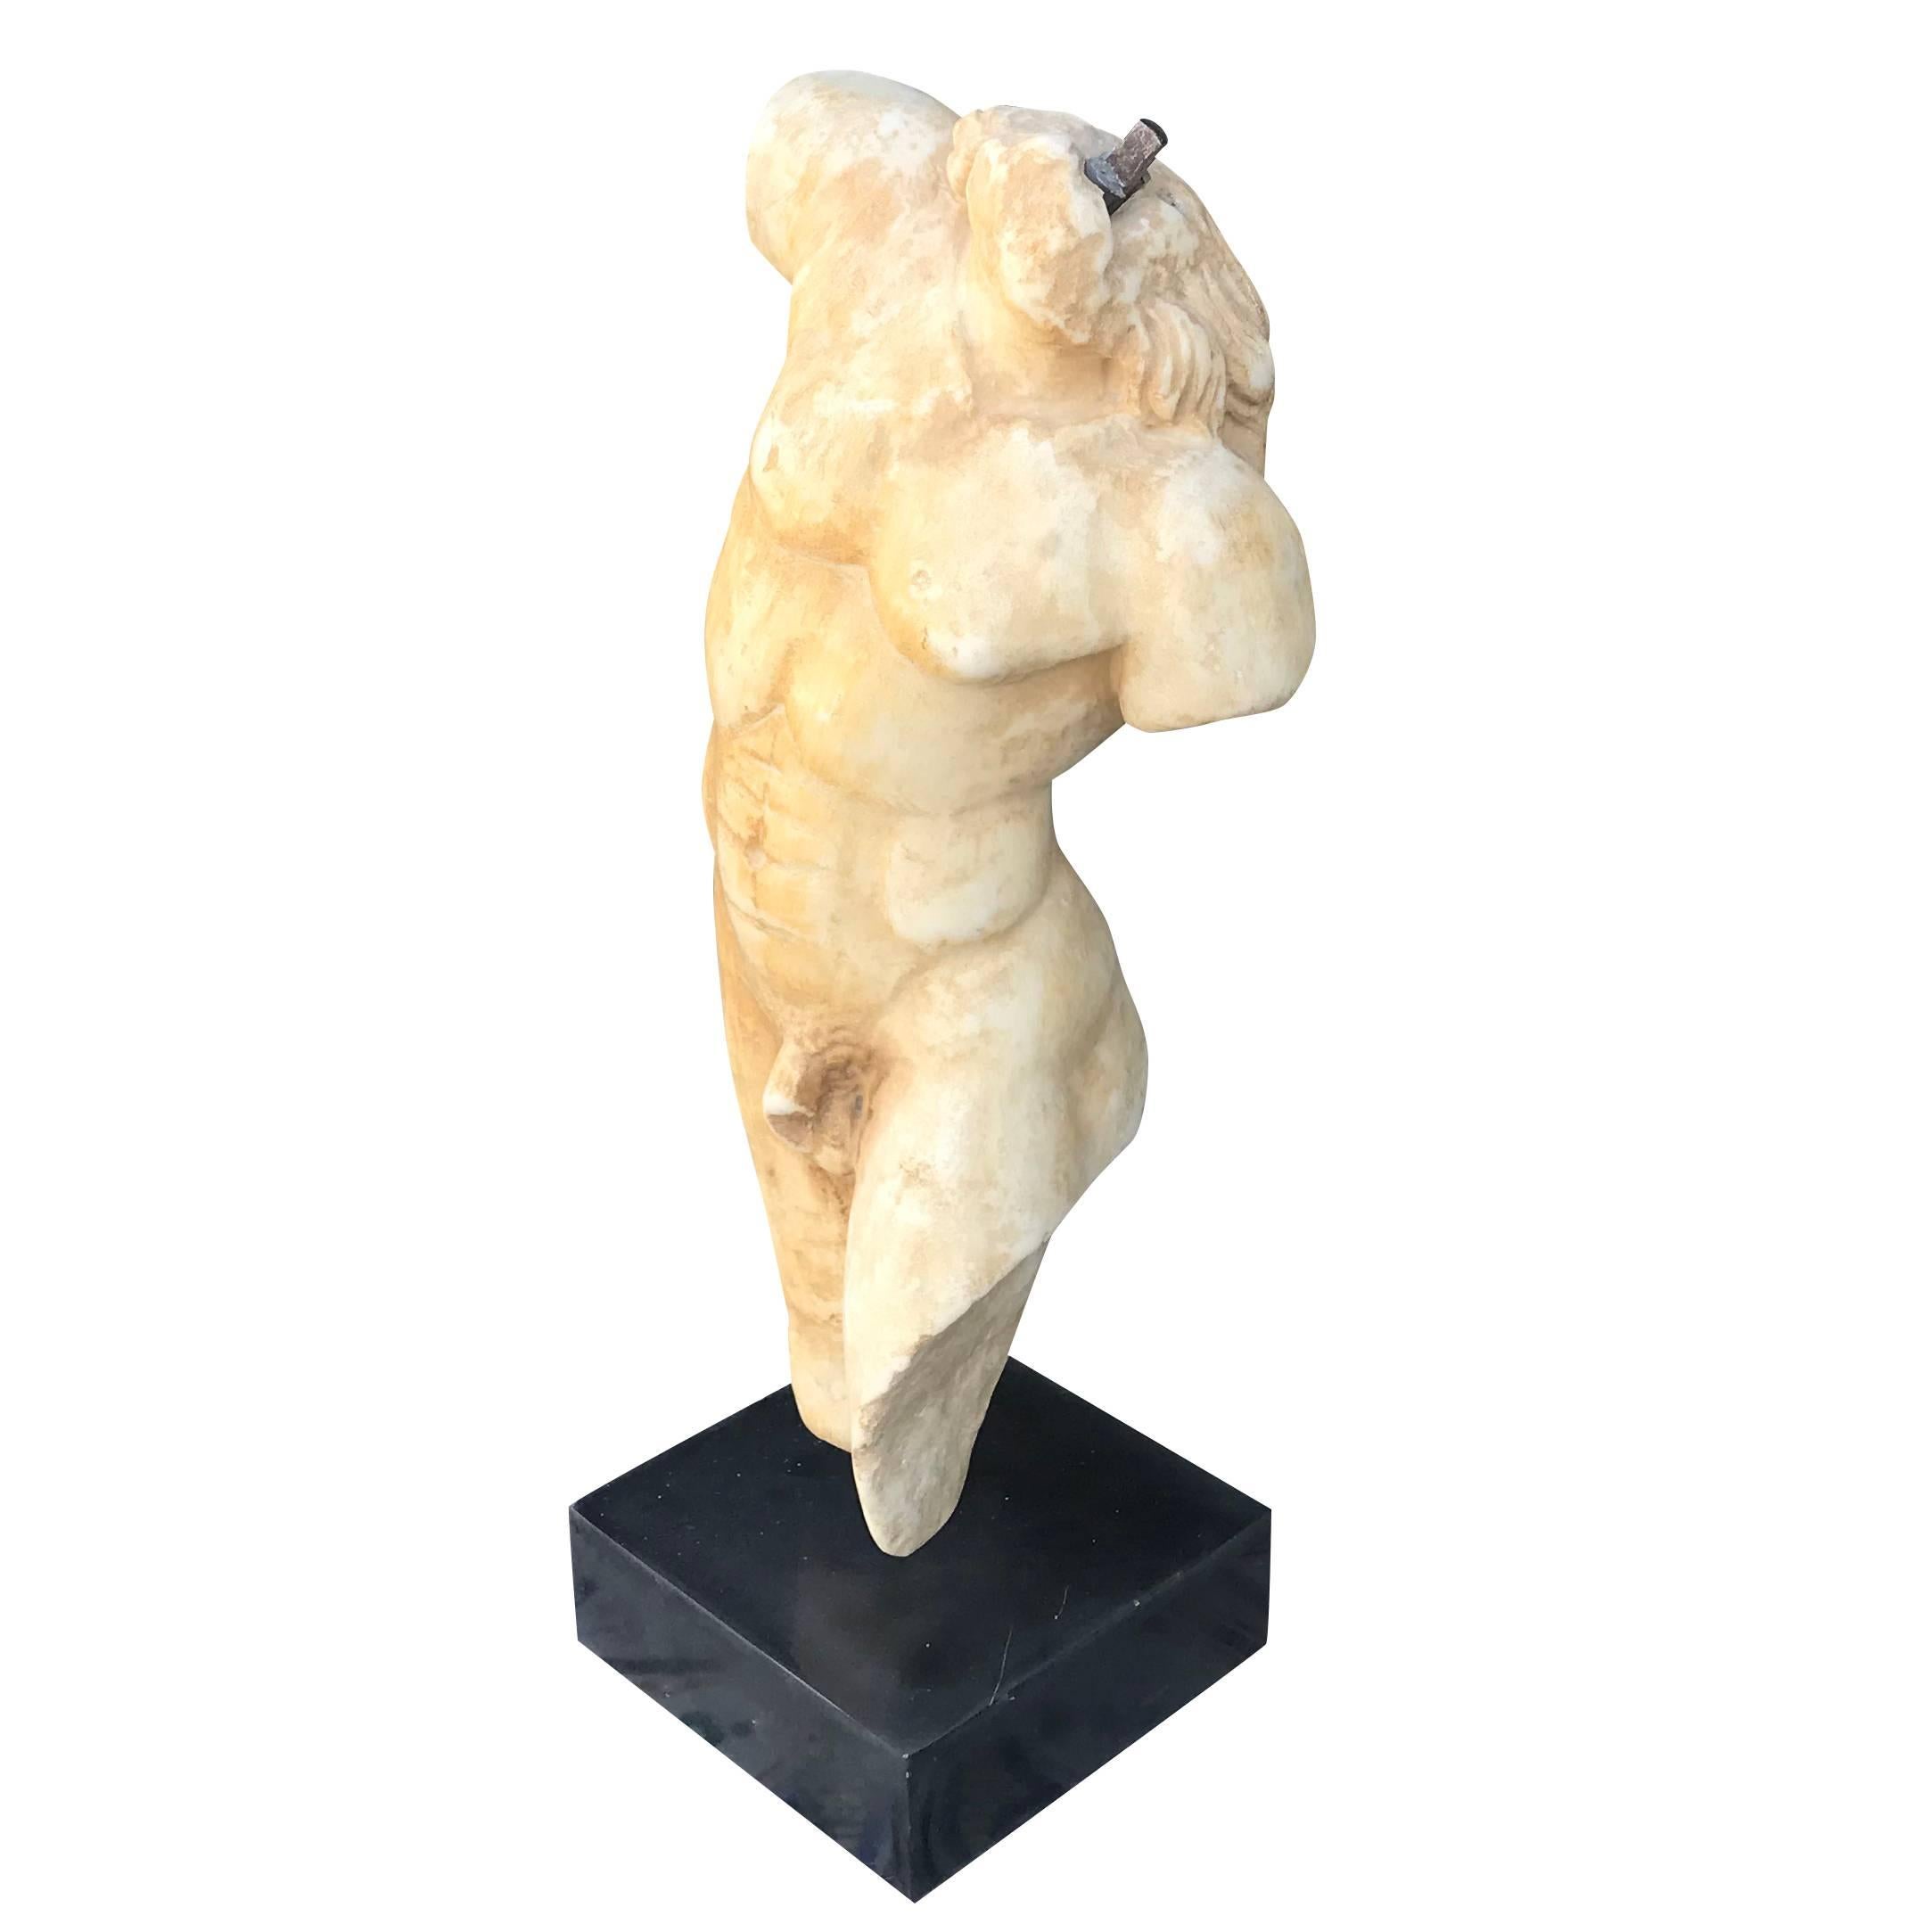 A hand-carved marble torso in Carrara marble mounted onto a square black marble base from Italy, circa 1880. Though the fragment lacks the head, arms and legs, the well formed body maintains the strength of movement.